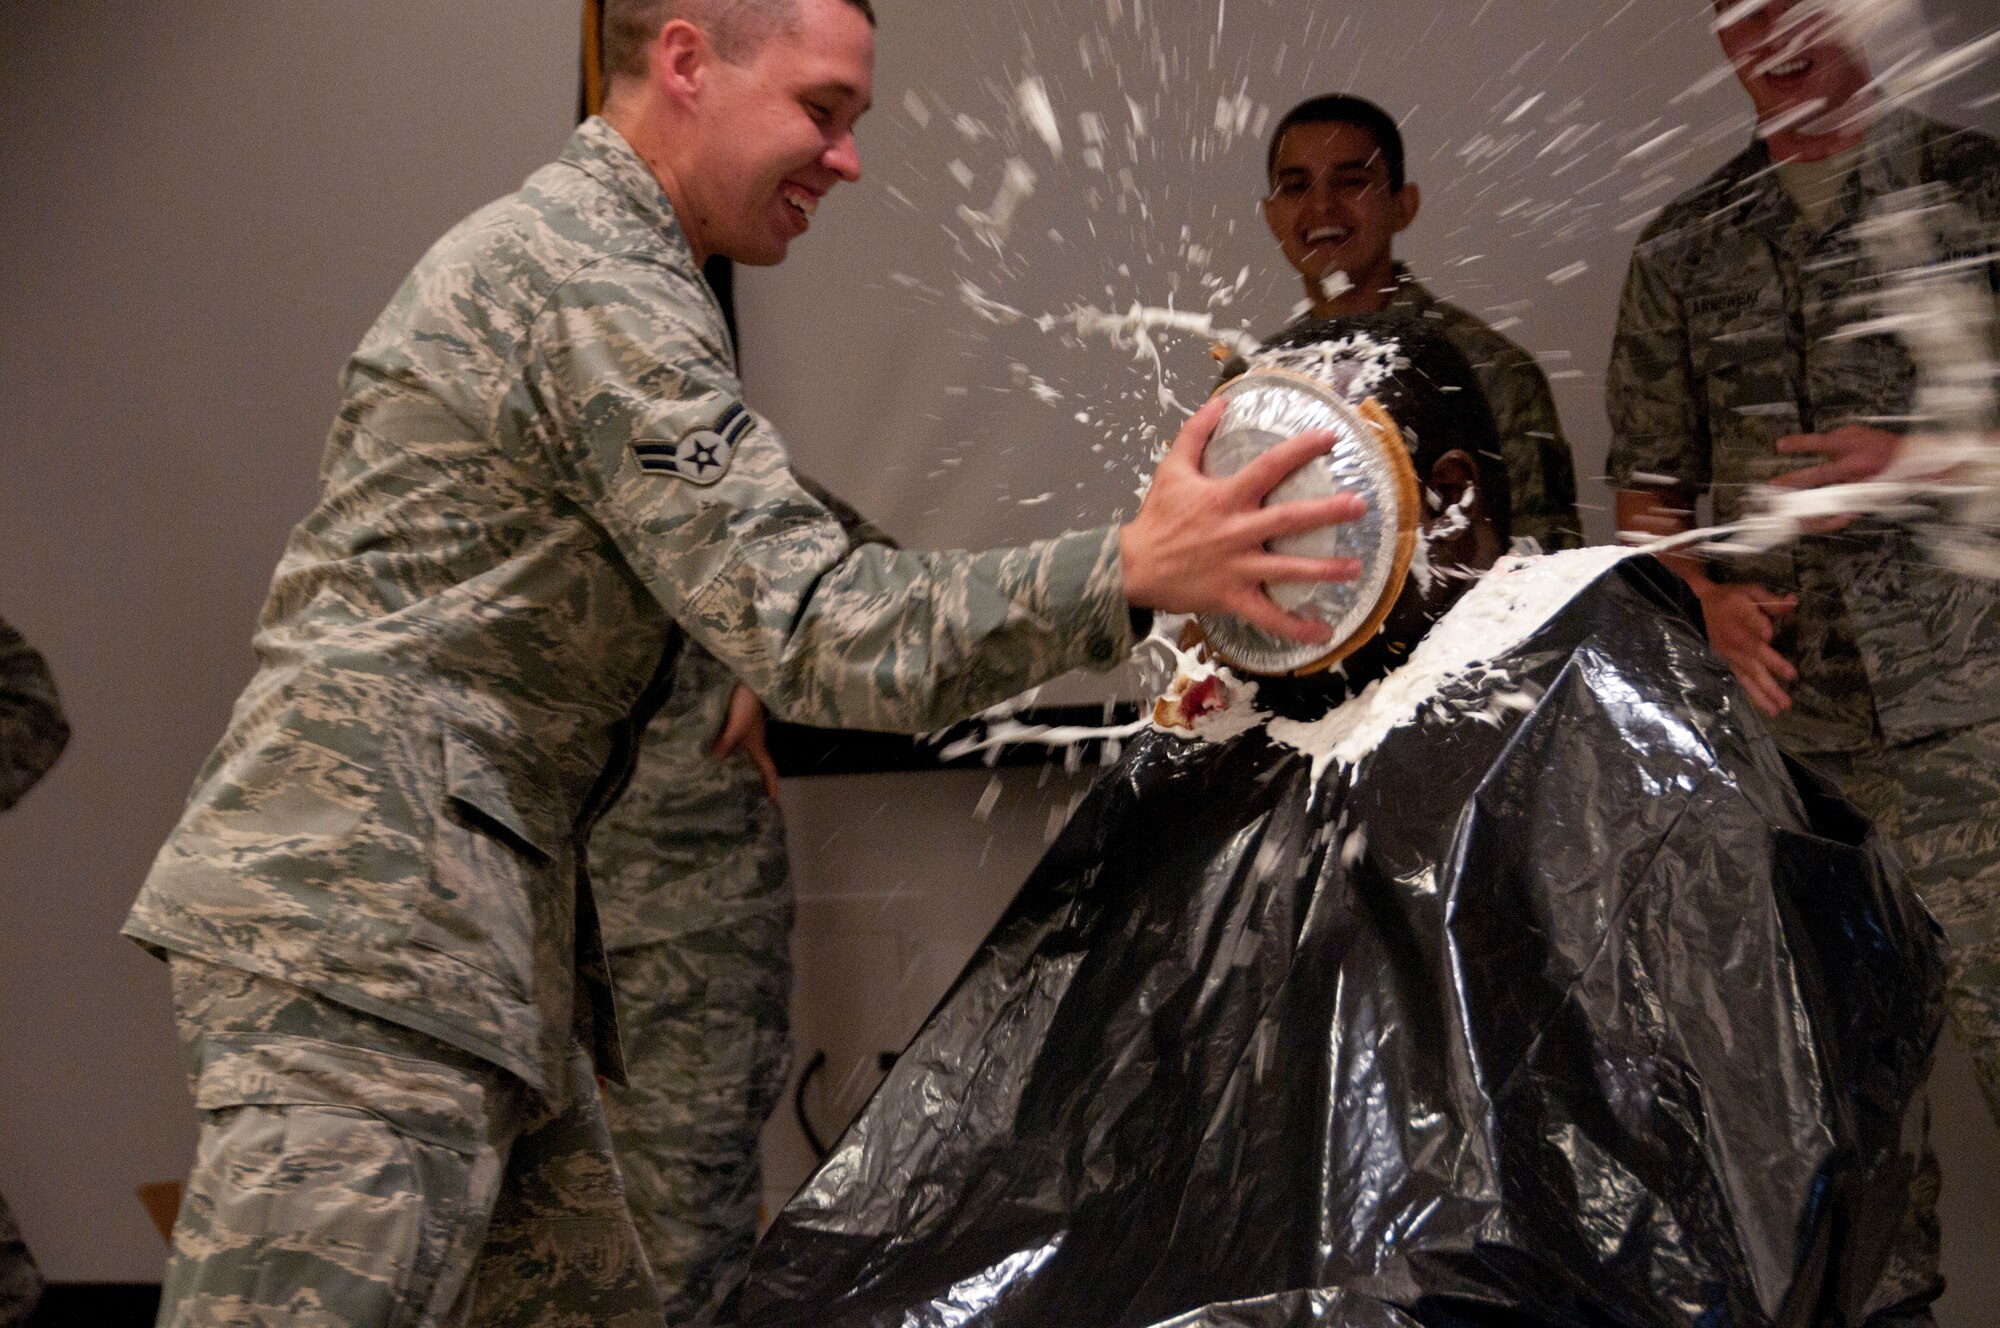 Chief Master Sgt. Bill Minter gets a pie in the face Aug. 6 from Airman 1st Class Michael Labreque. The 162nd Fighter Wing Junior Enlisted Council and wing senior leaders worked together on the “Pie in the Face” fund raising event to benefit several worthy JEC programs. (U.S. Air Force photo/Master Sgt. Dave Neve)